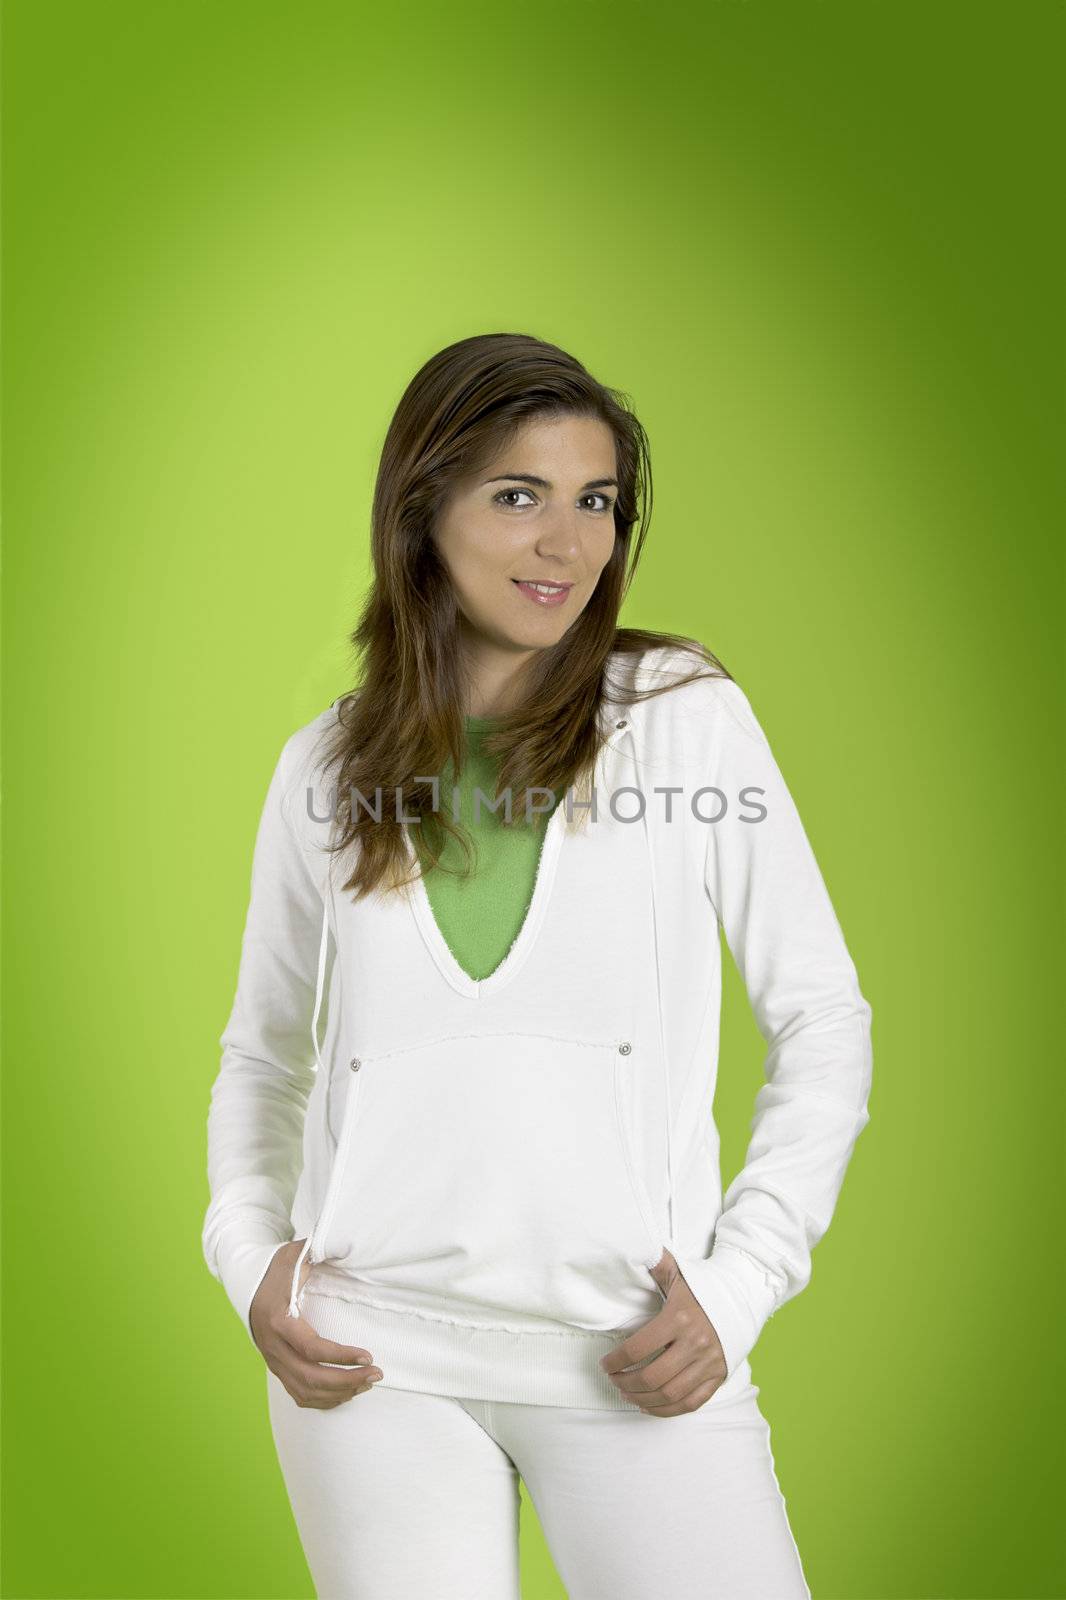 Young woman gently smiling on a green background